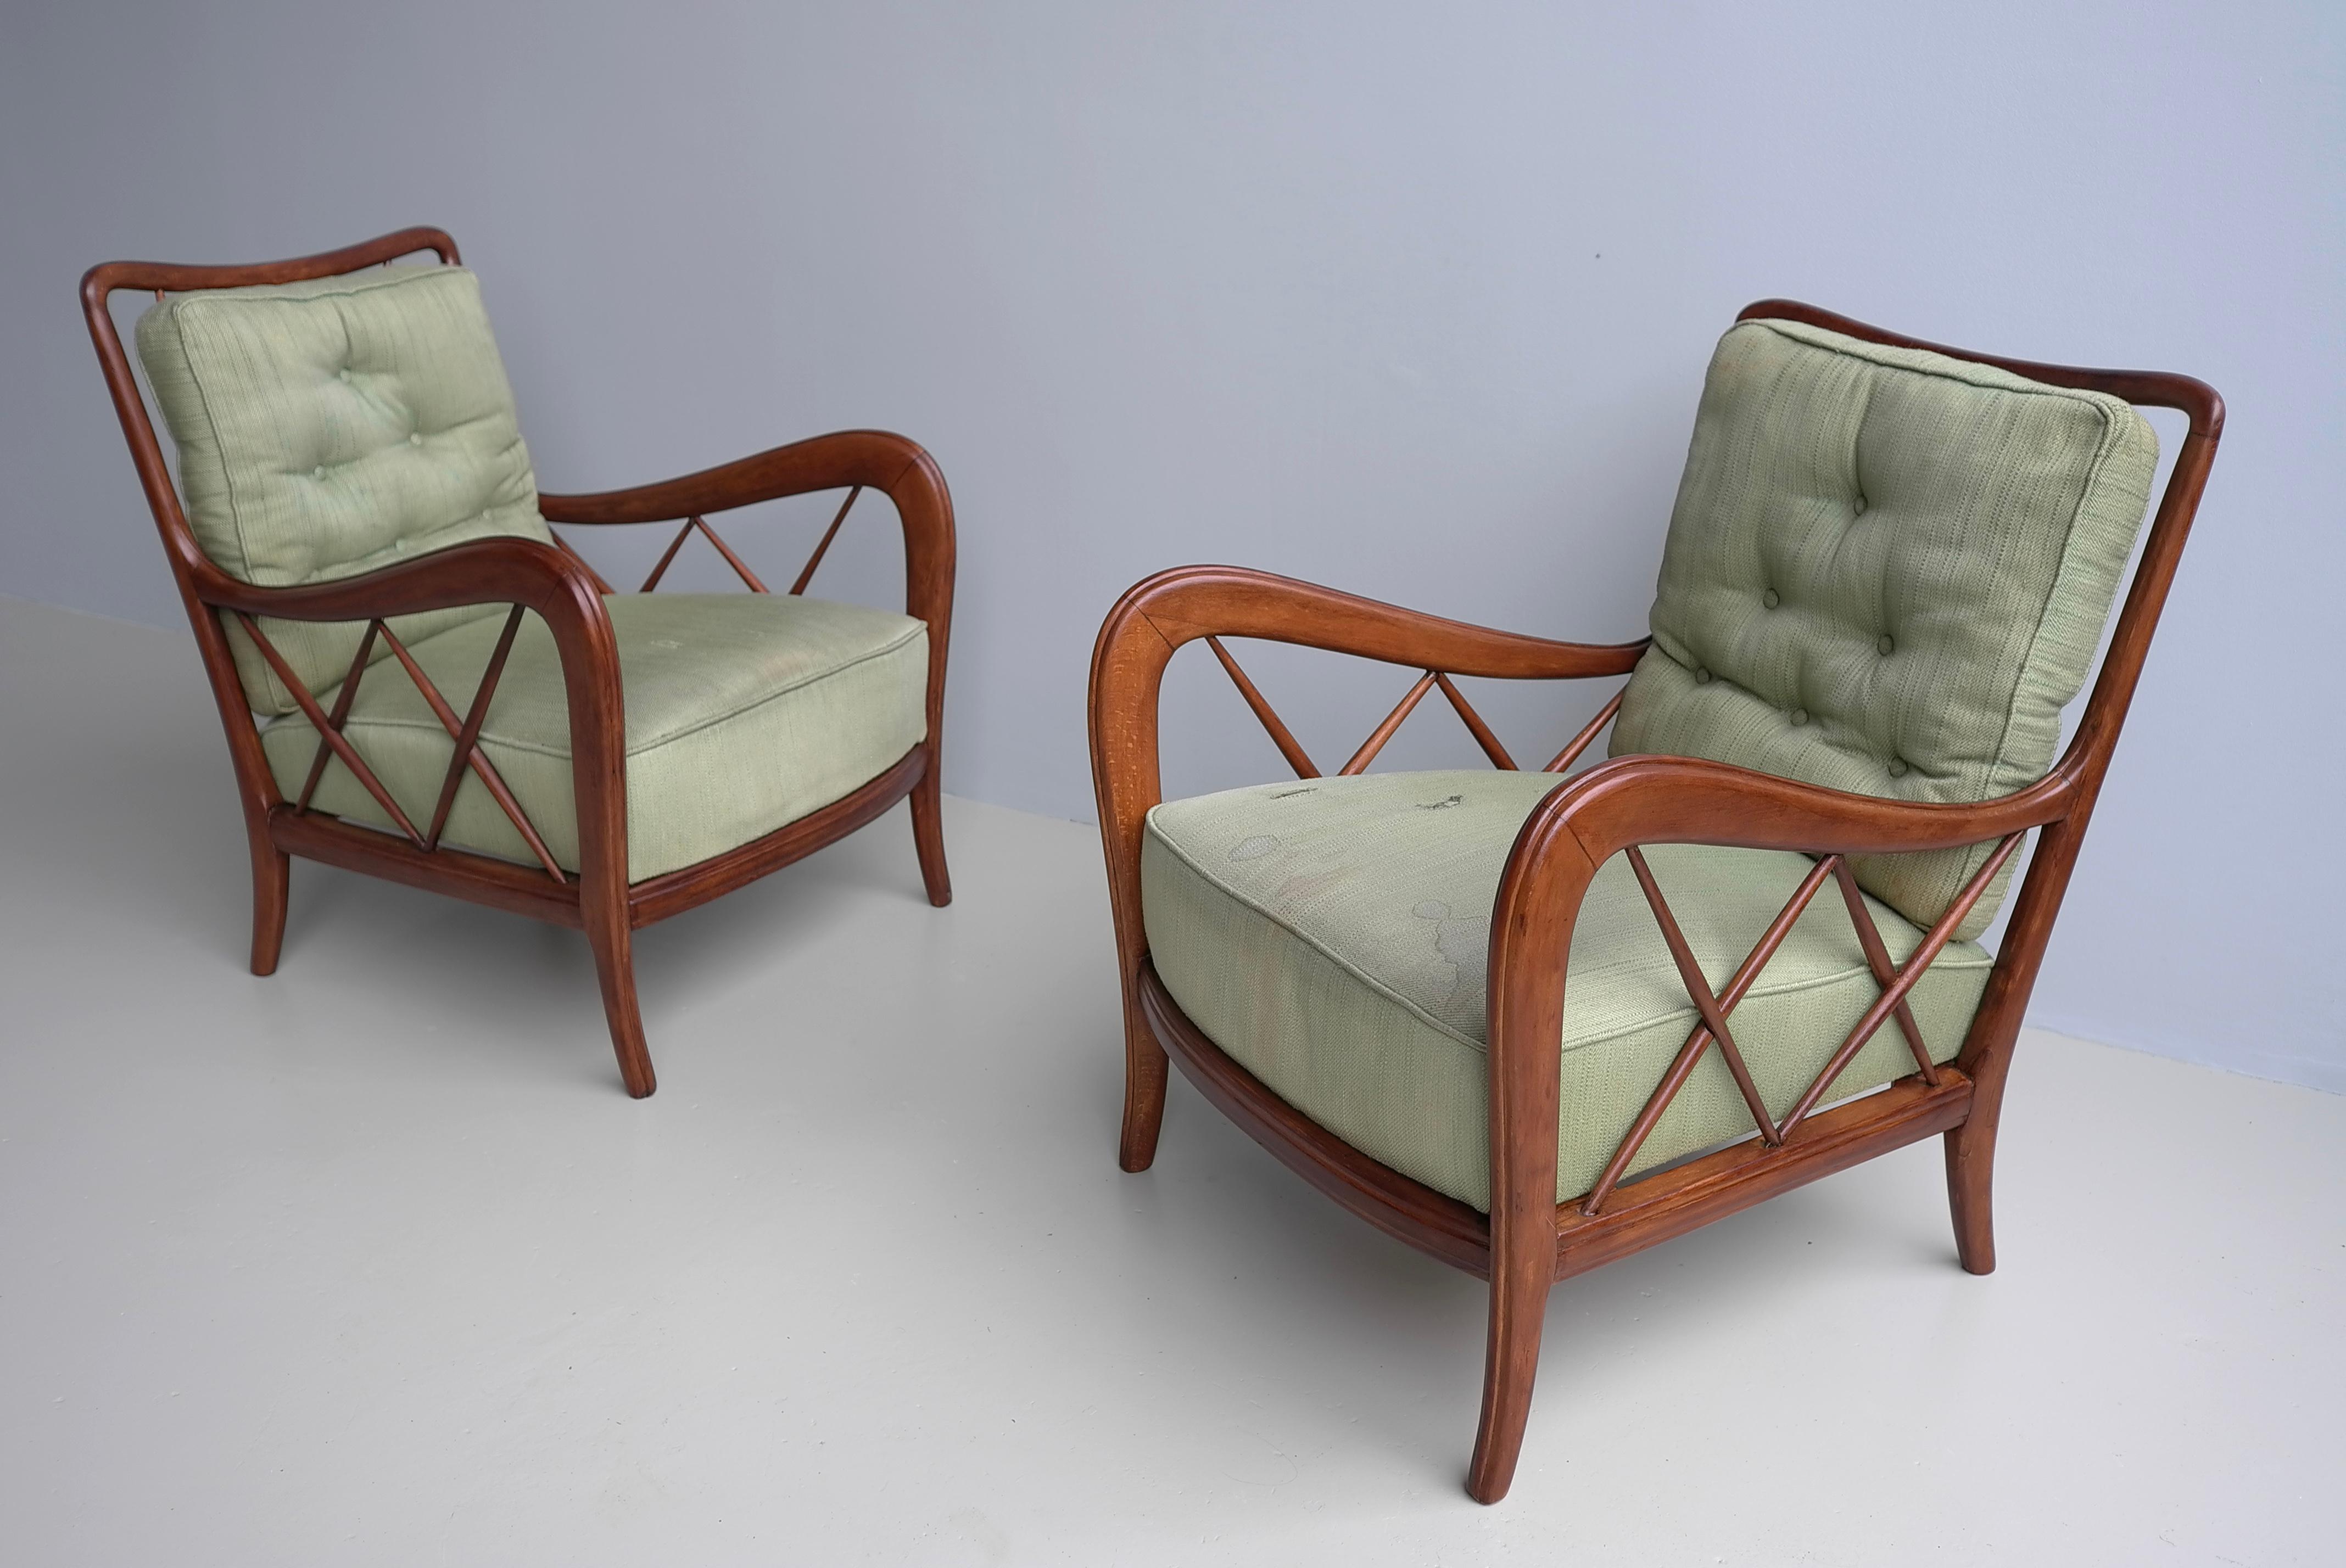 Walnut Wooden Lounge Chairs attr Paolo Buffa, Milan Italy 1940's For Sale 4